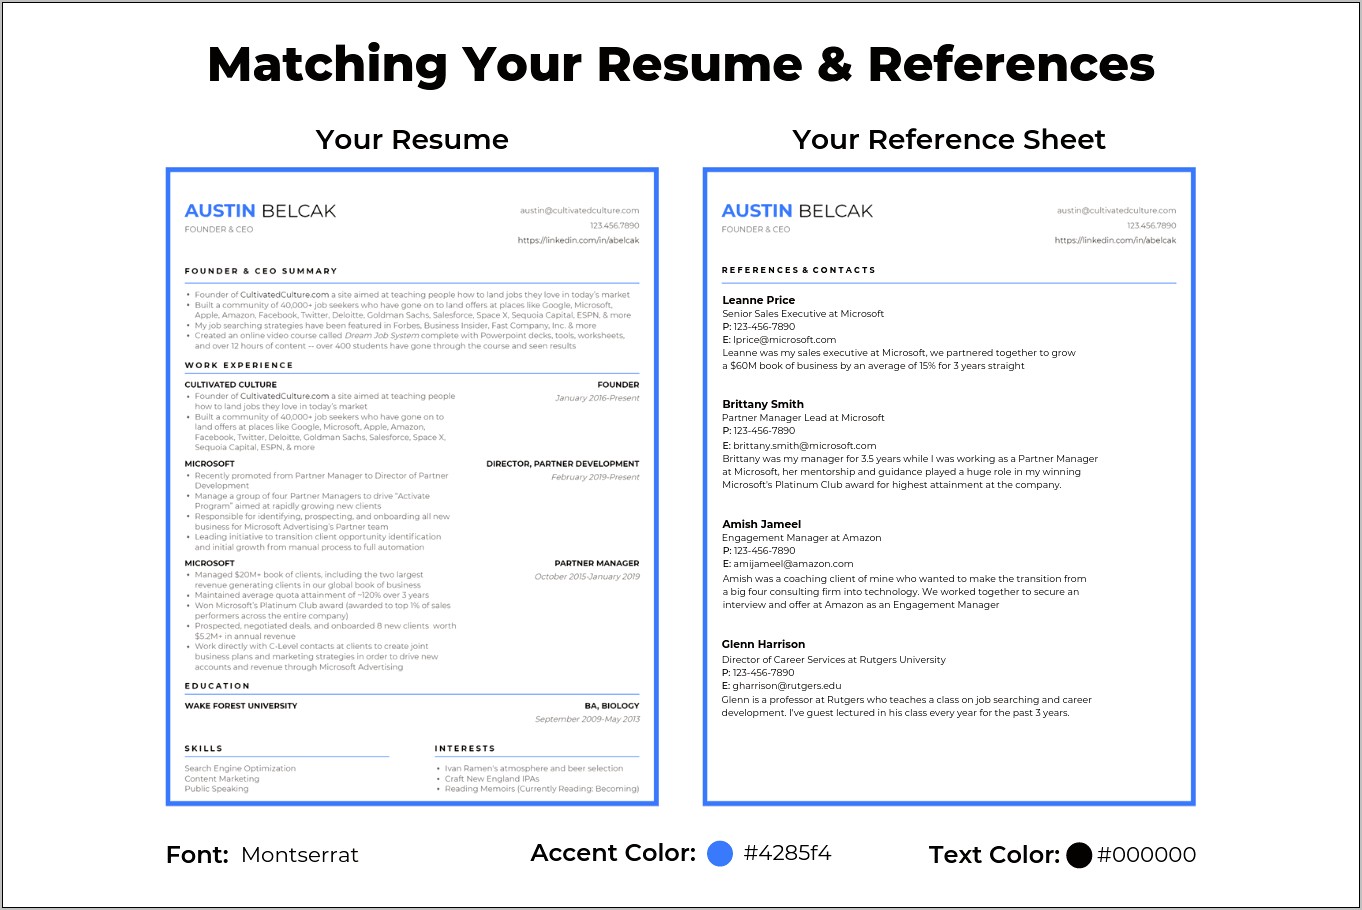 Best Peole To Get Refernces For Resume